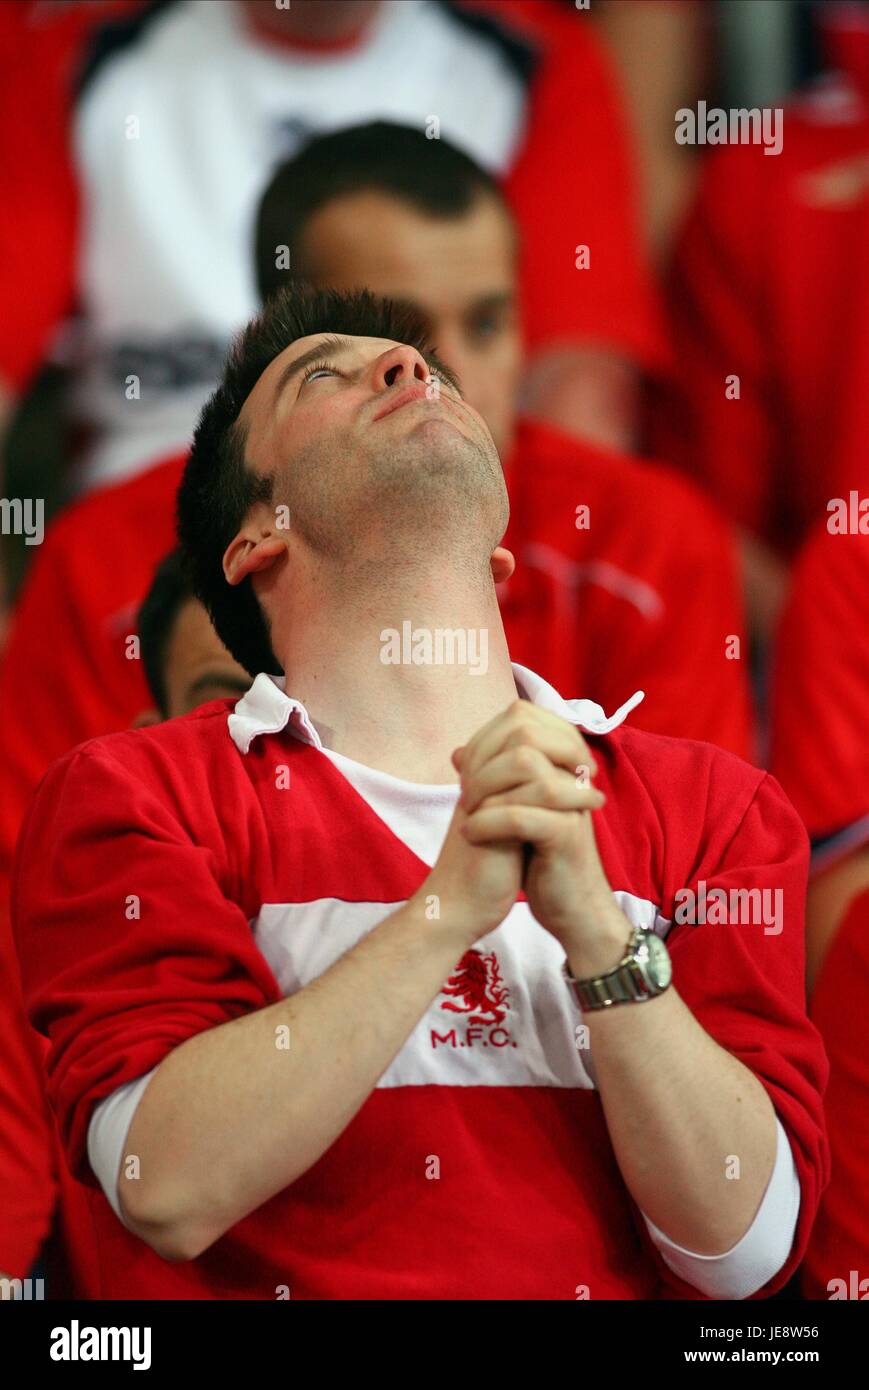 FAN PRAYS FOR ANOTHER MIRACLE MIDDLESBROUGH V SEVILLE PHILIPS STADIUM EINDHOVEN HOLLAND 10 May 2006 Stock Photo